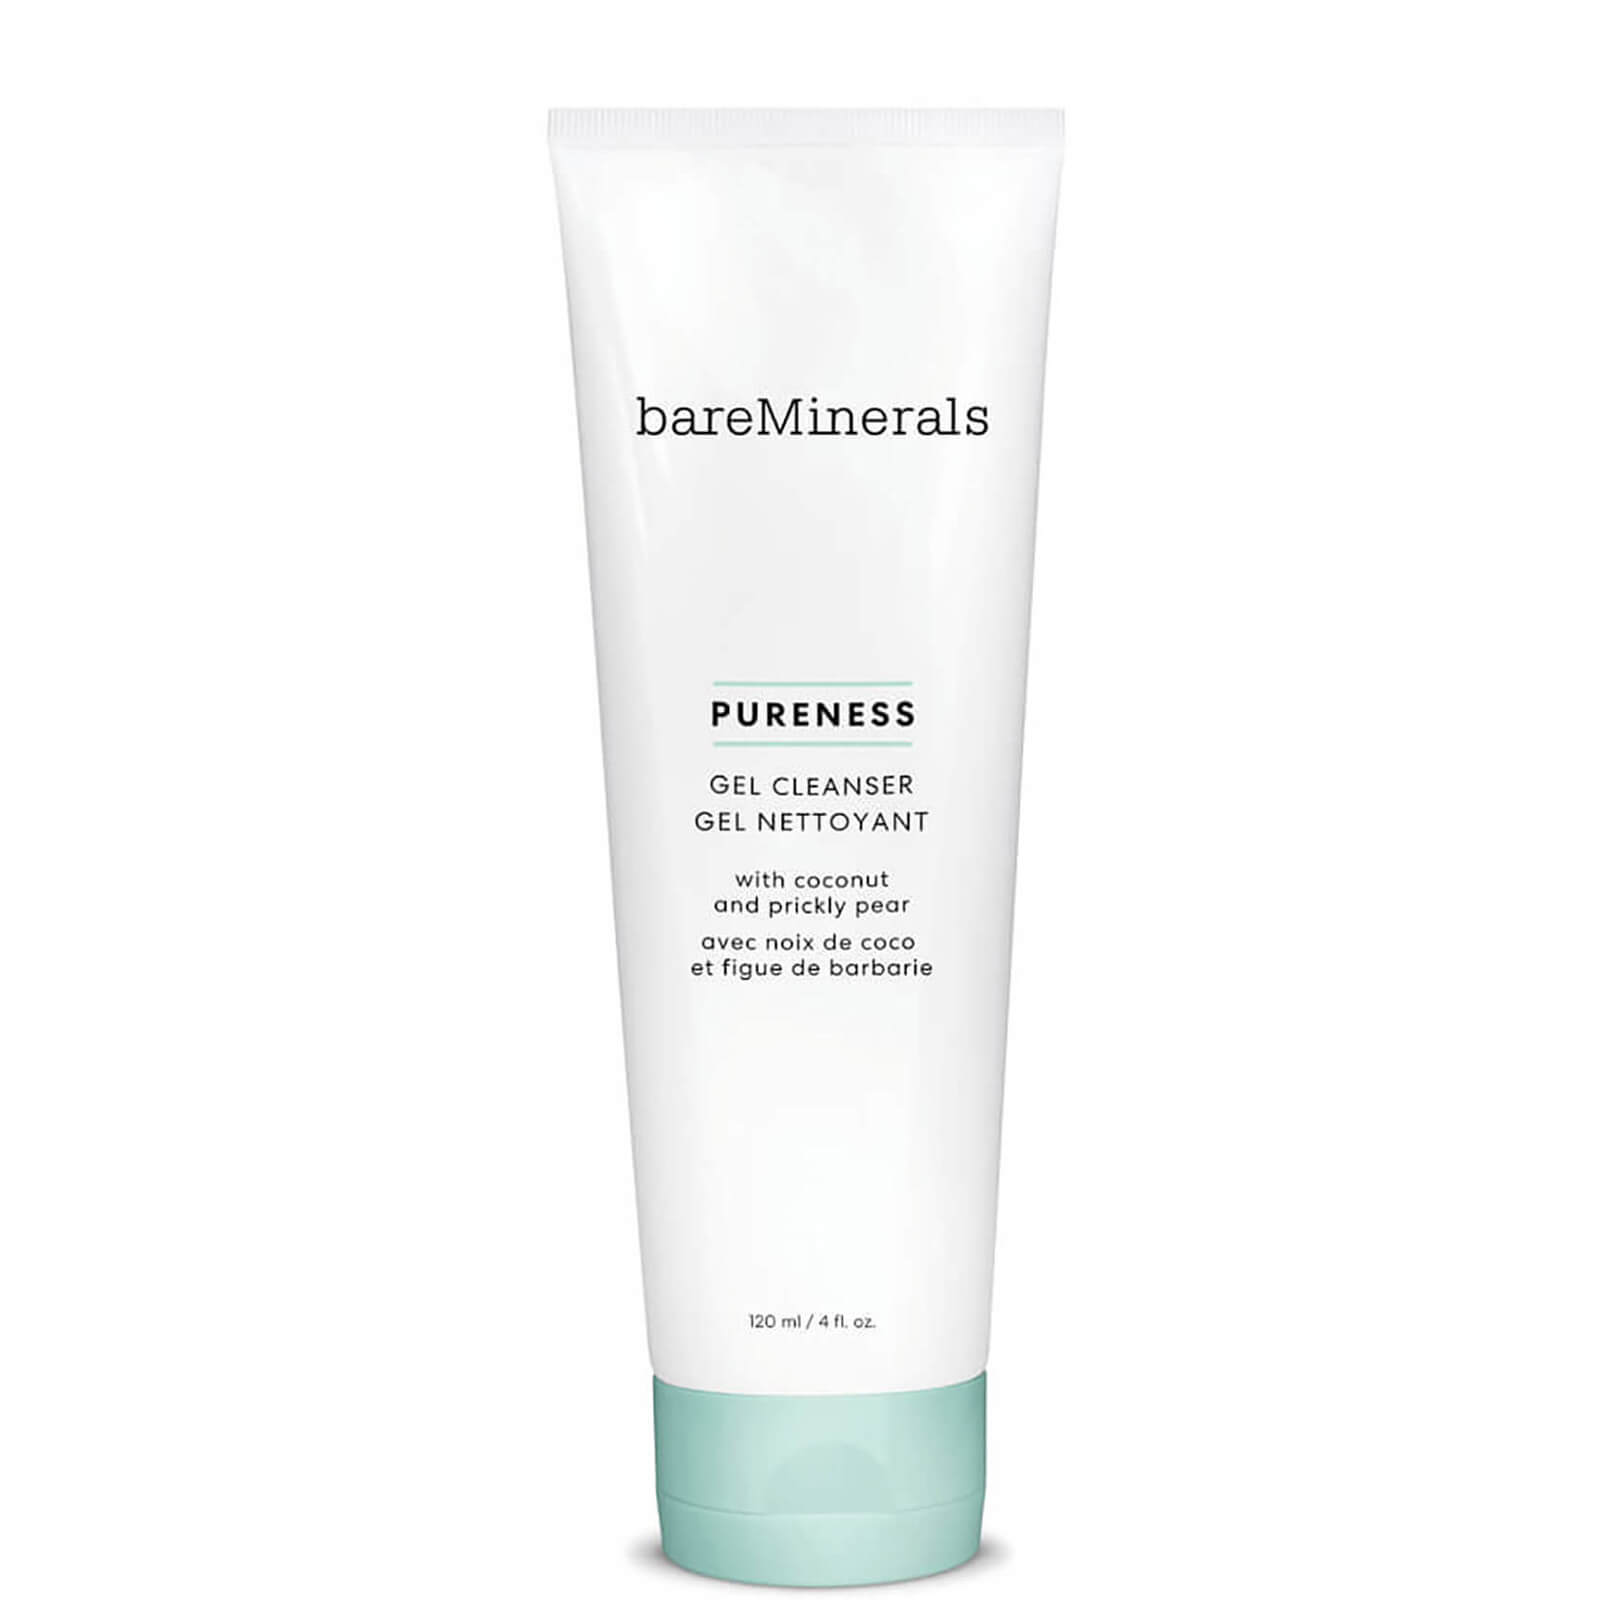 Image of bareMinerals Pureness Gel Cleanser 120ml